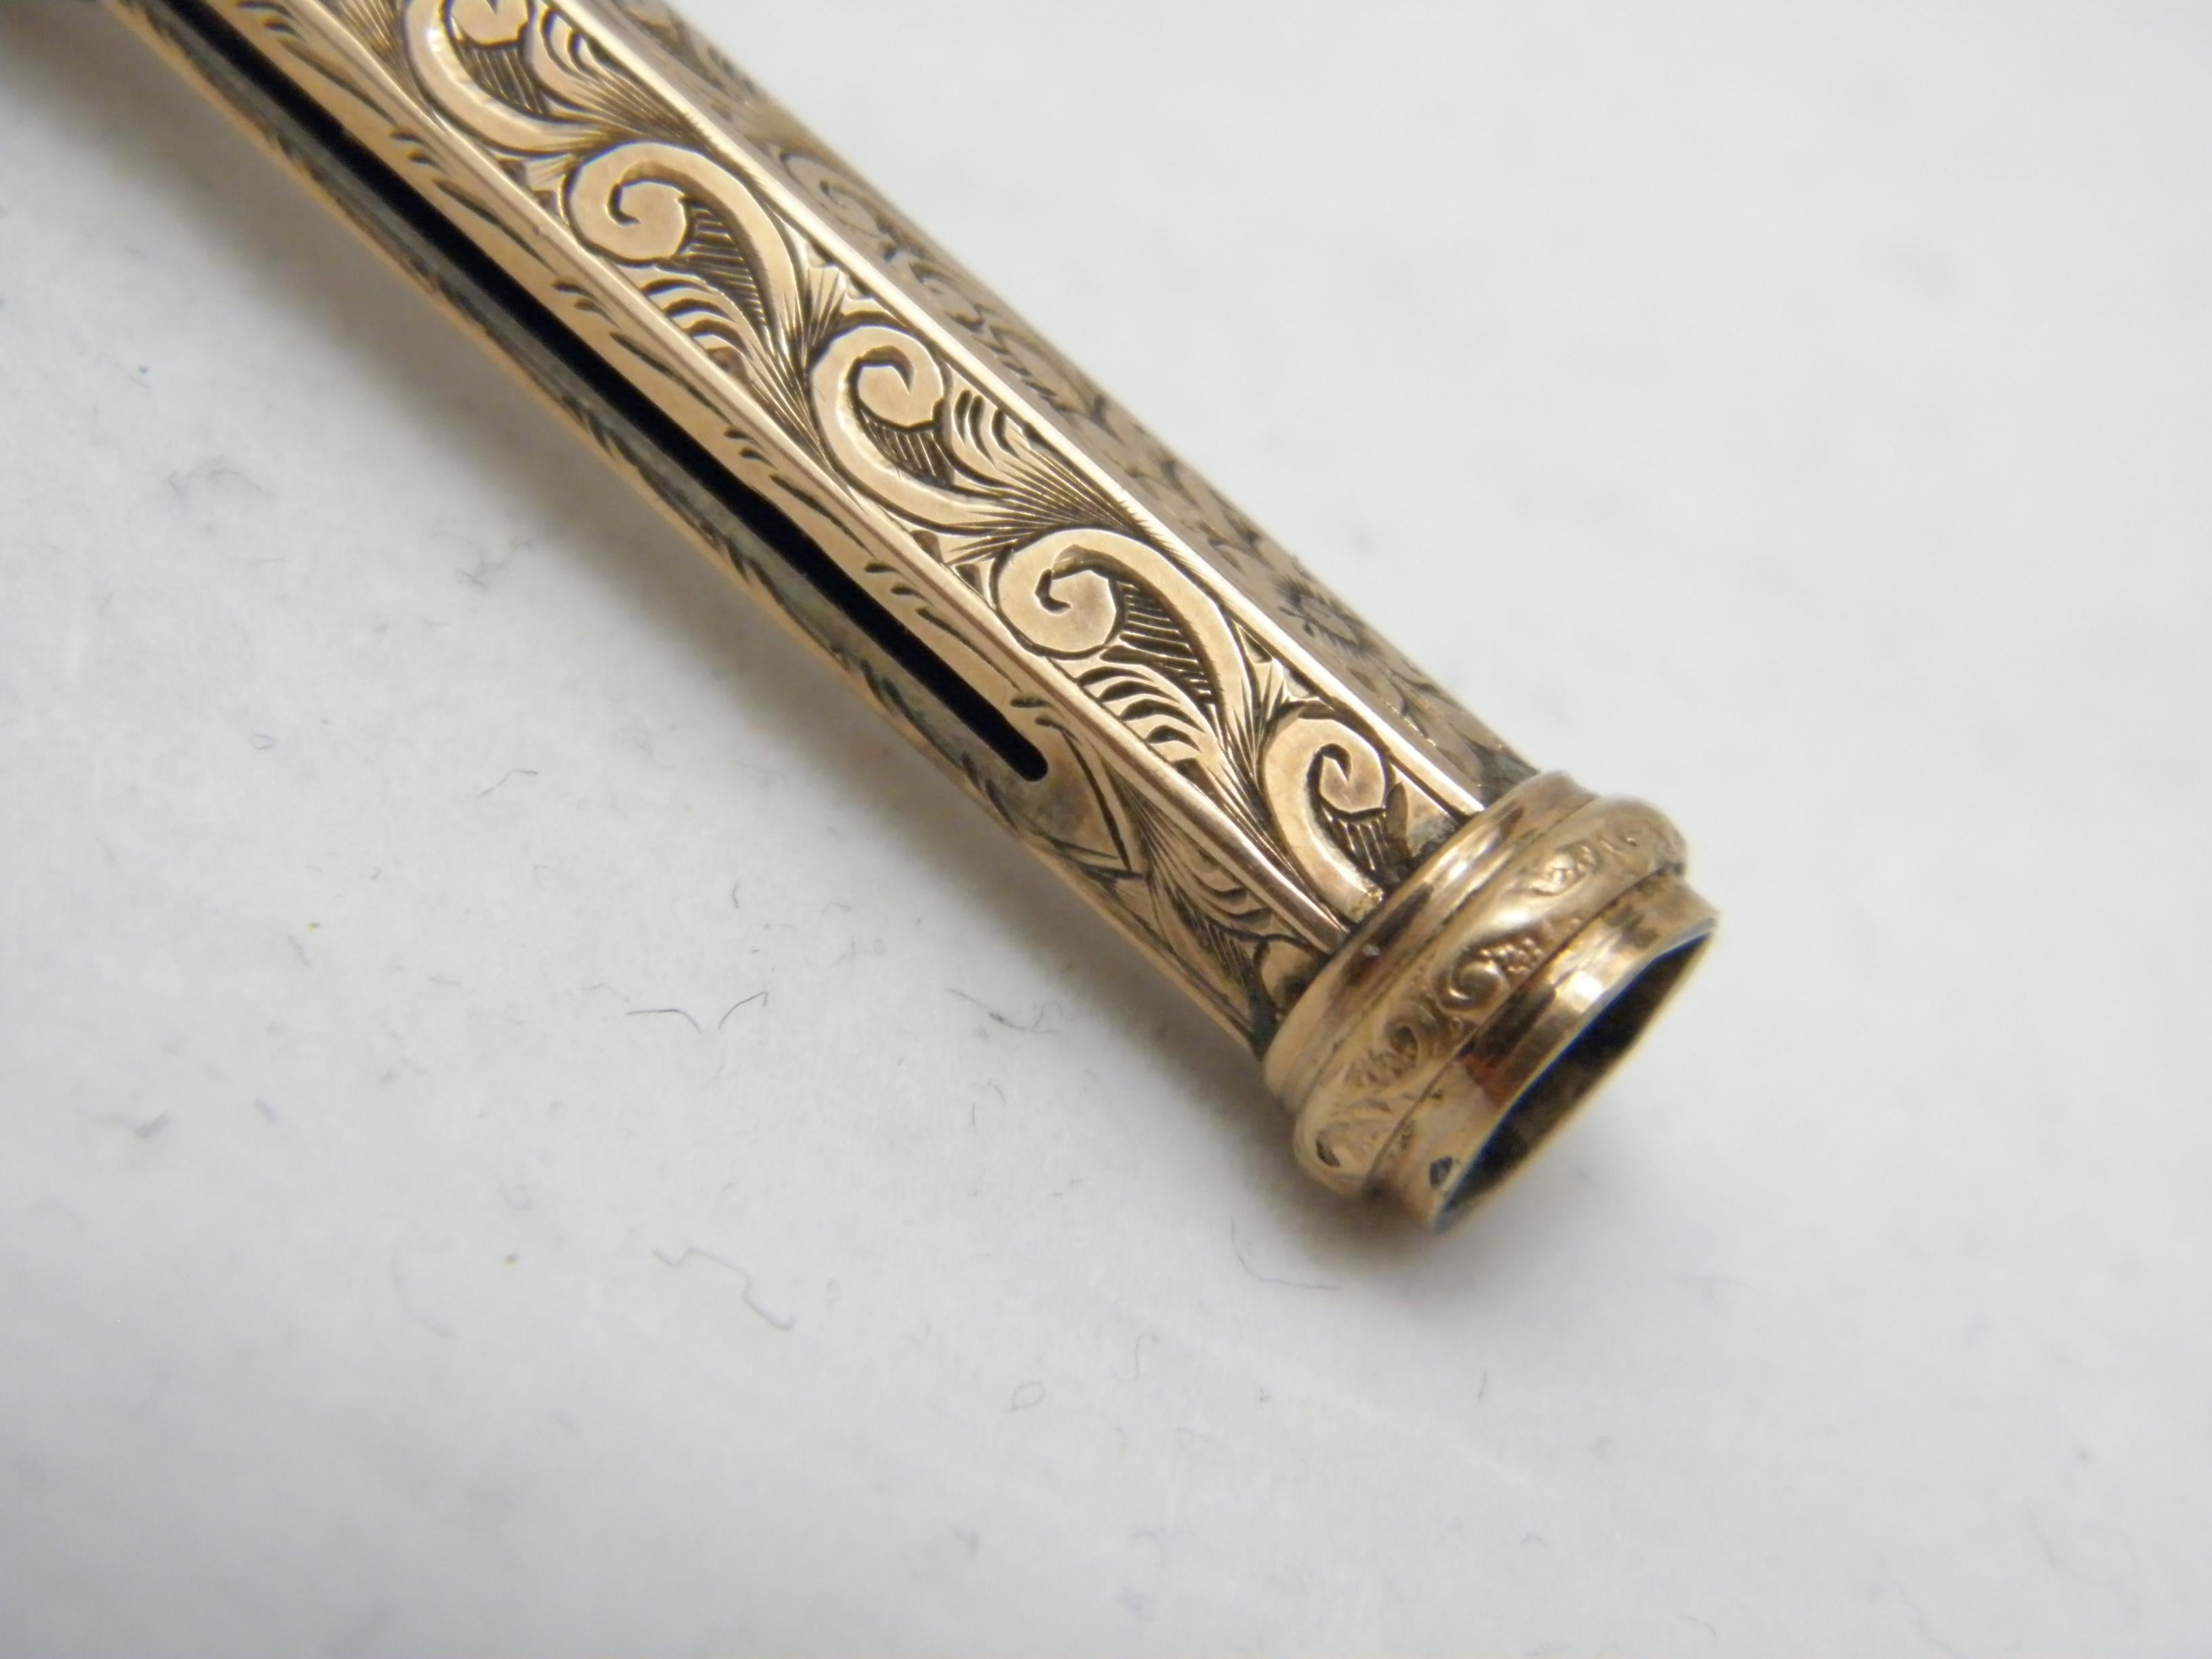 Antique 9ct Rose Gold Propelling Pencil c1850 375 Purity Massive Heavy 18.4g For Sale 2